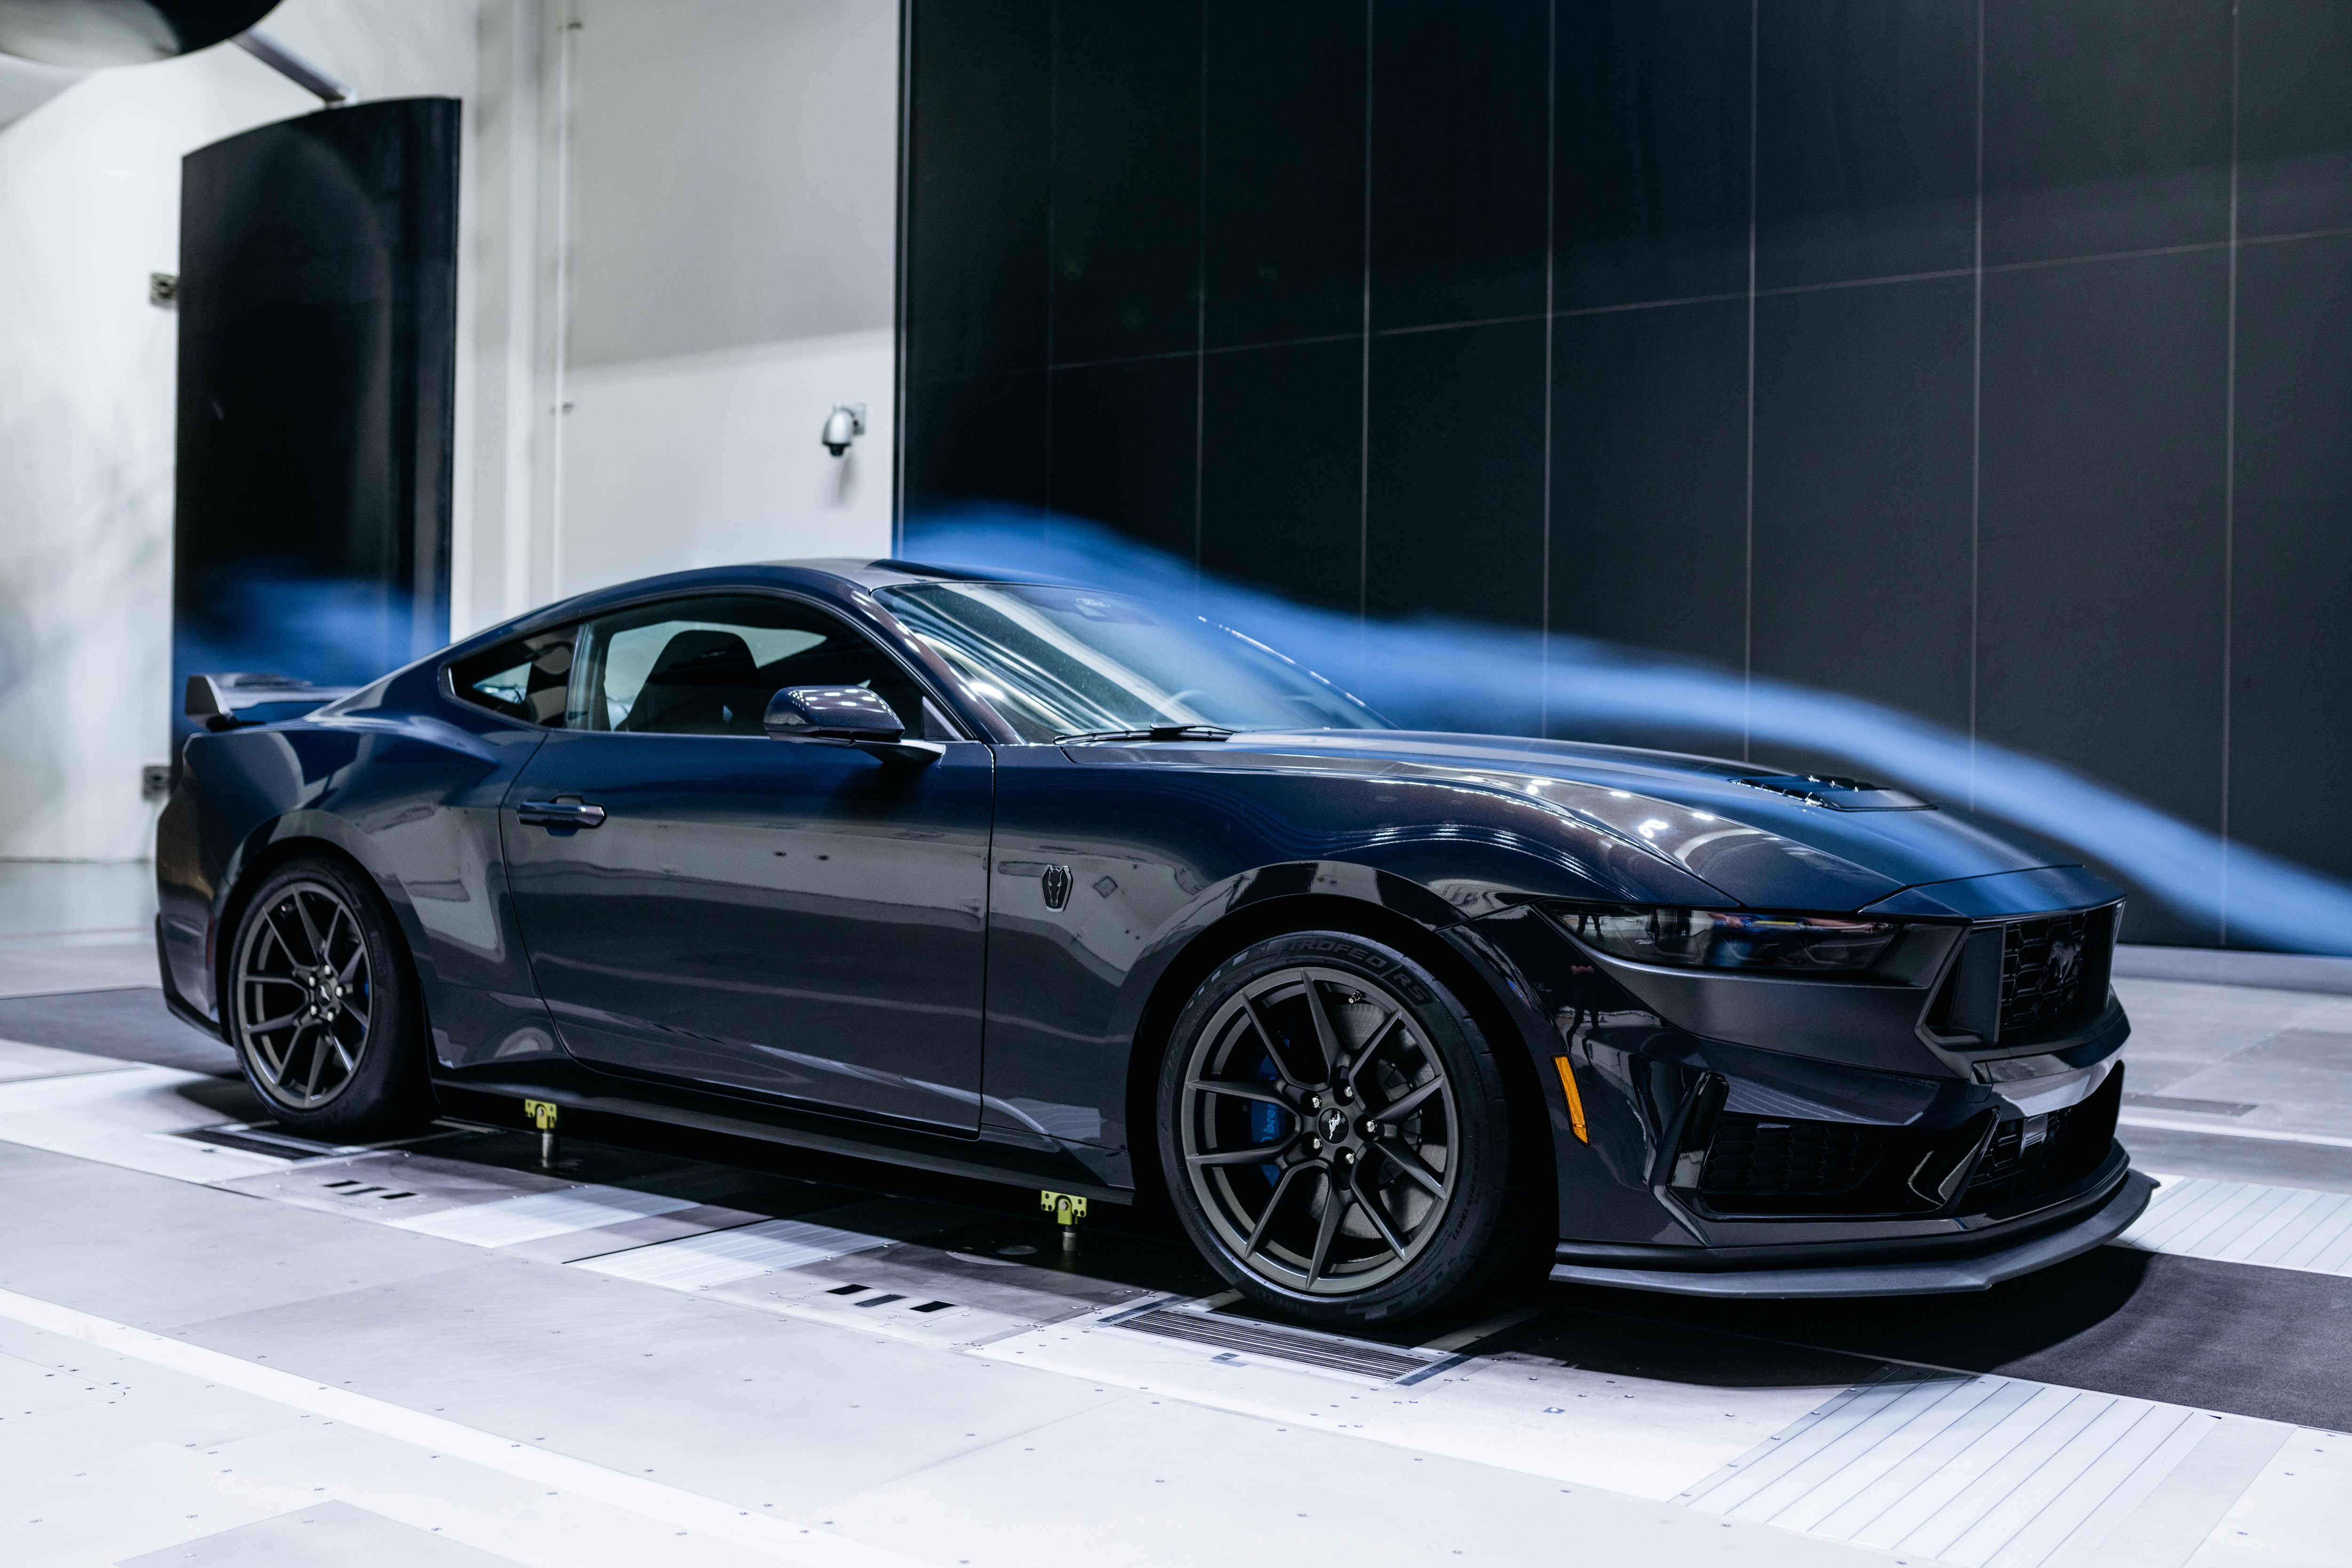 Ford’s 200 MPH Wind Tunnel Gives the Mustang Dark Horse and GT3 an Edge